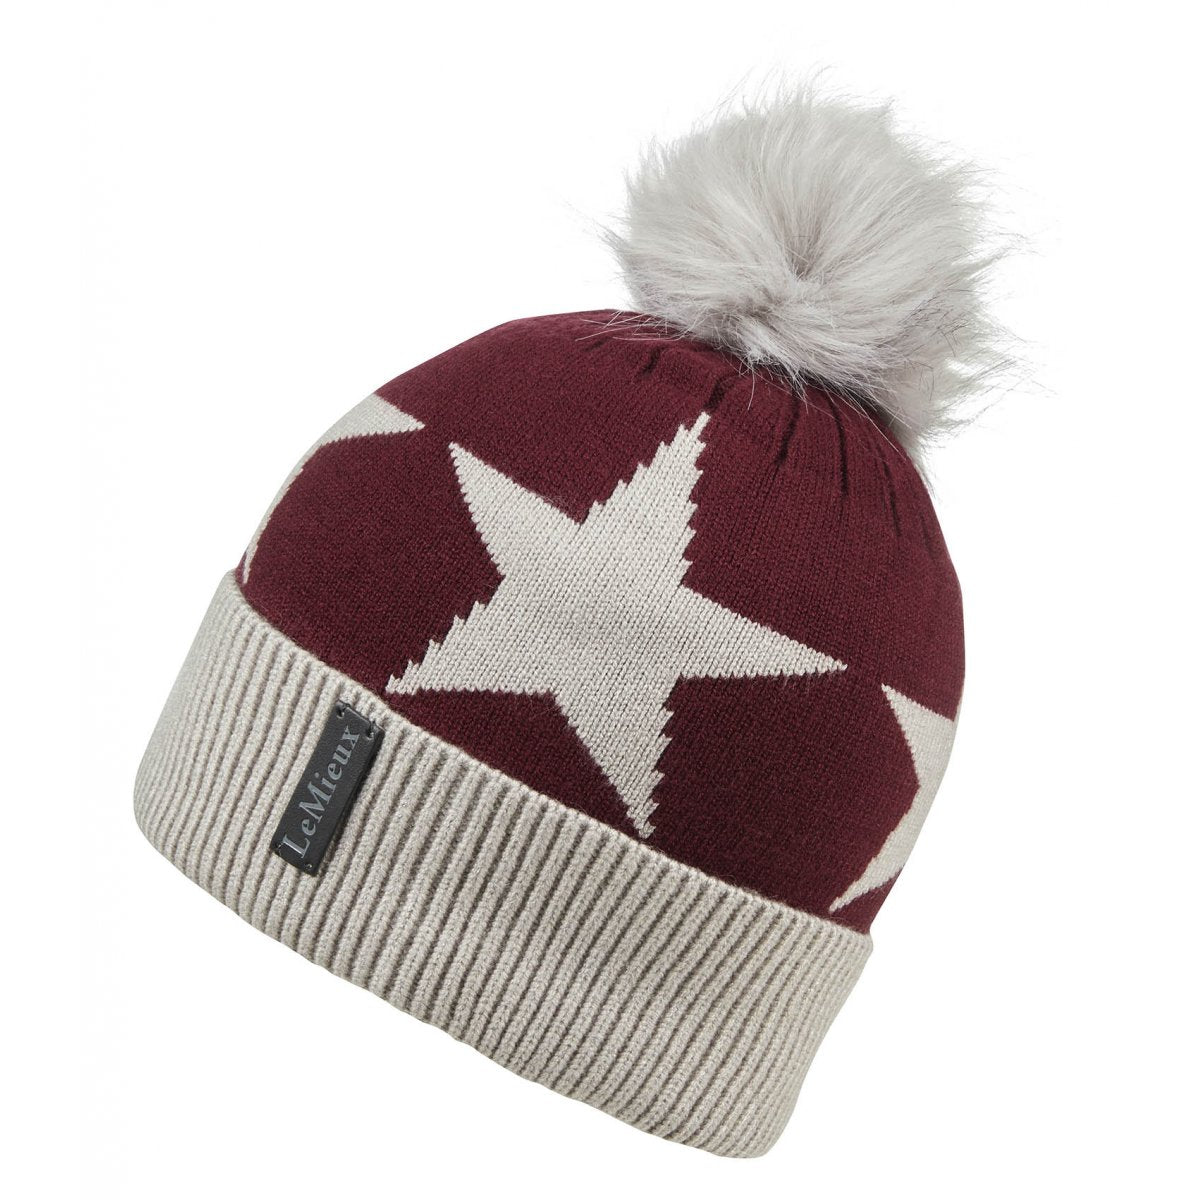 A maroon and cream Lemieux beanie with a star pattern and a fluffy pom-pom on top.